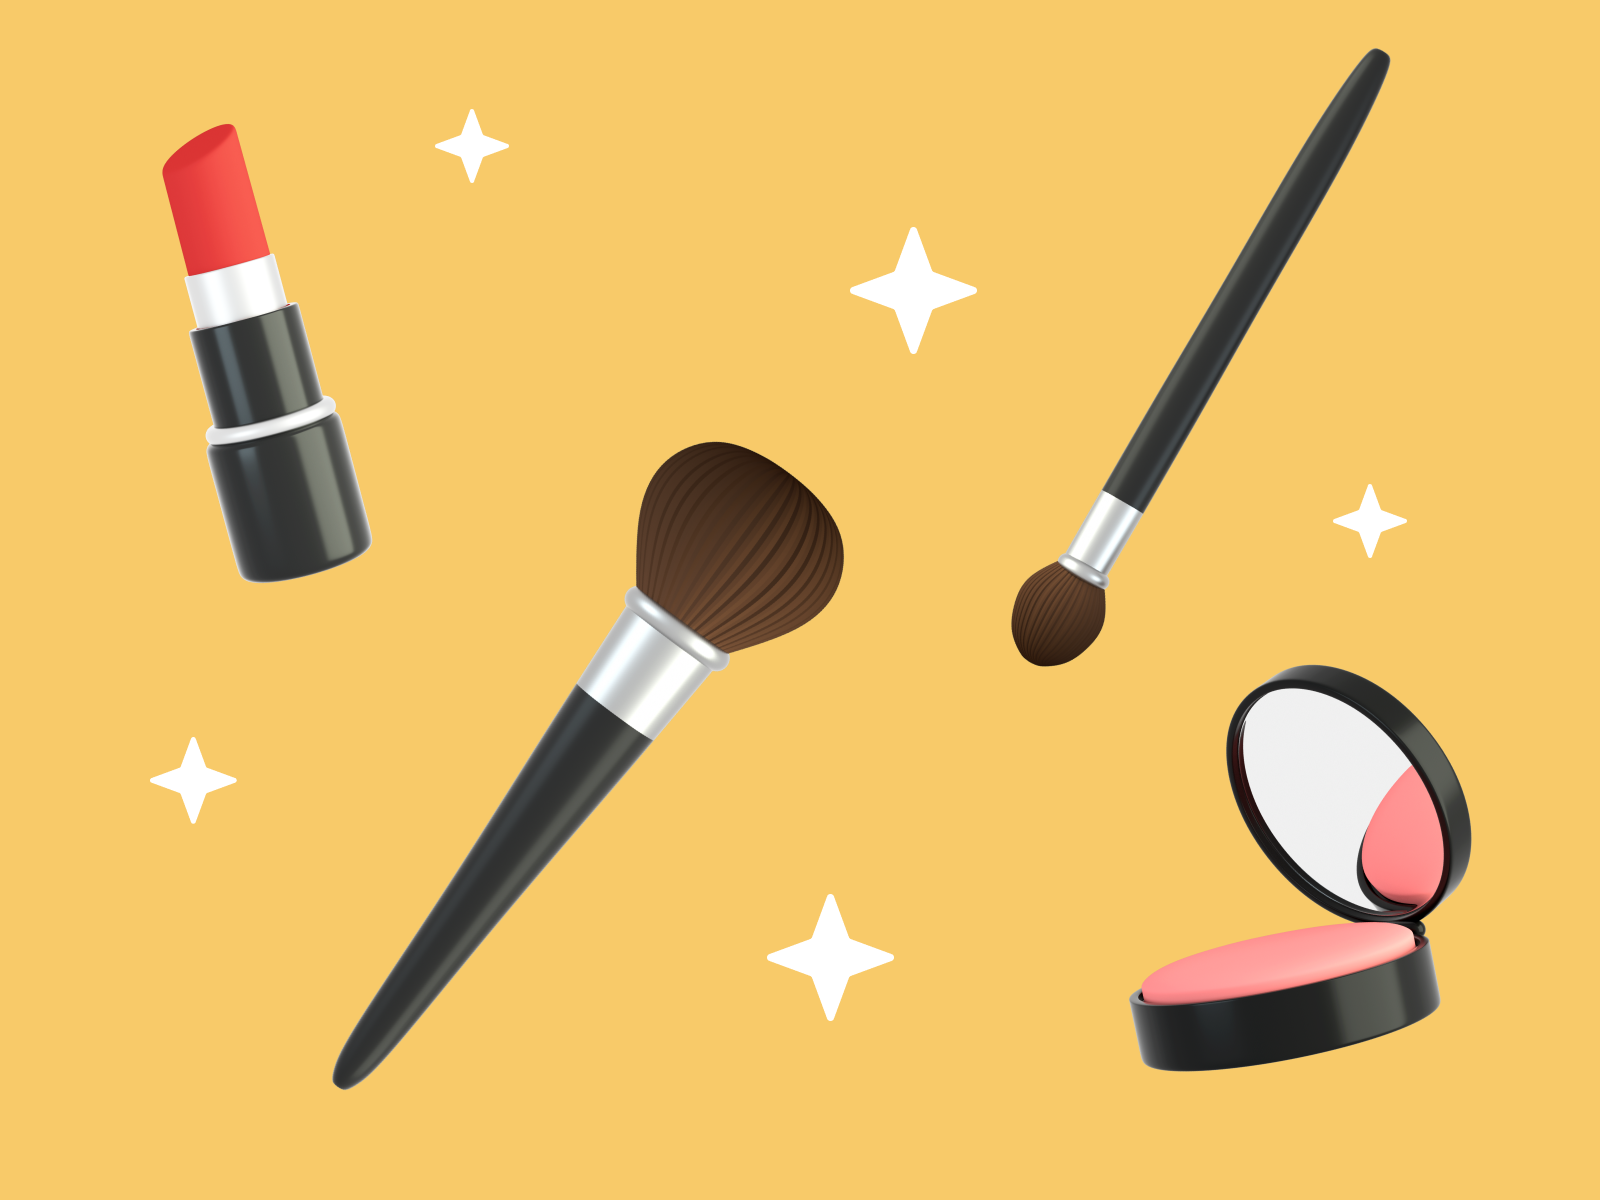 3D Makeup Products by Samantha Lopez on Dribbble